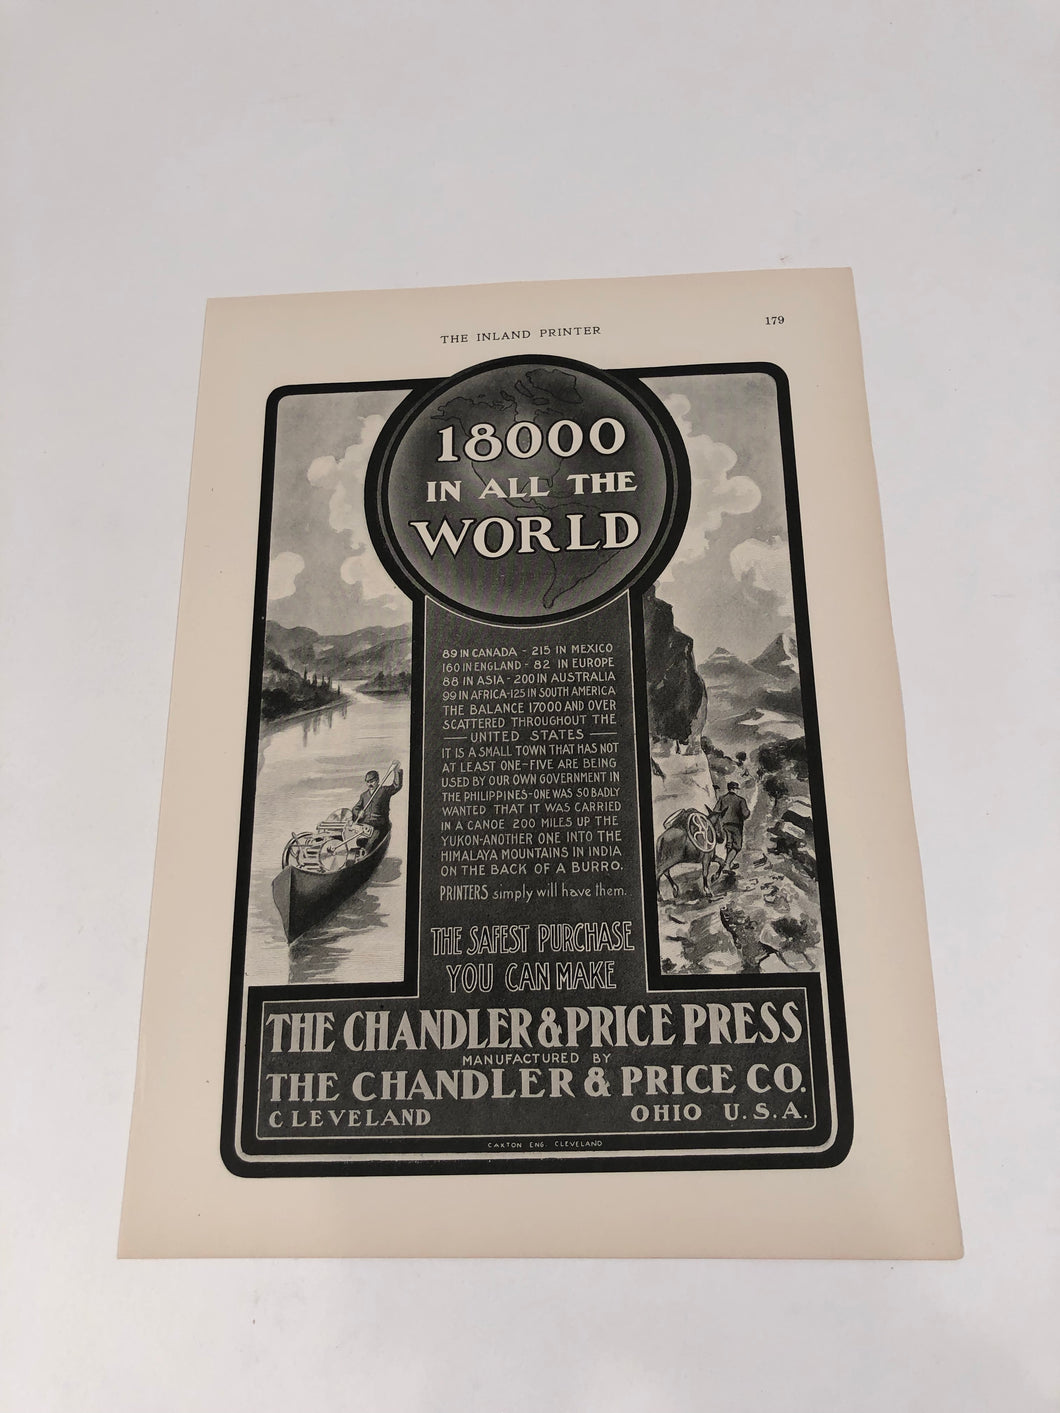 Chandler and Price Printing Press Antique Advertisement Featured in The INLAND PRINTER